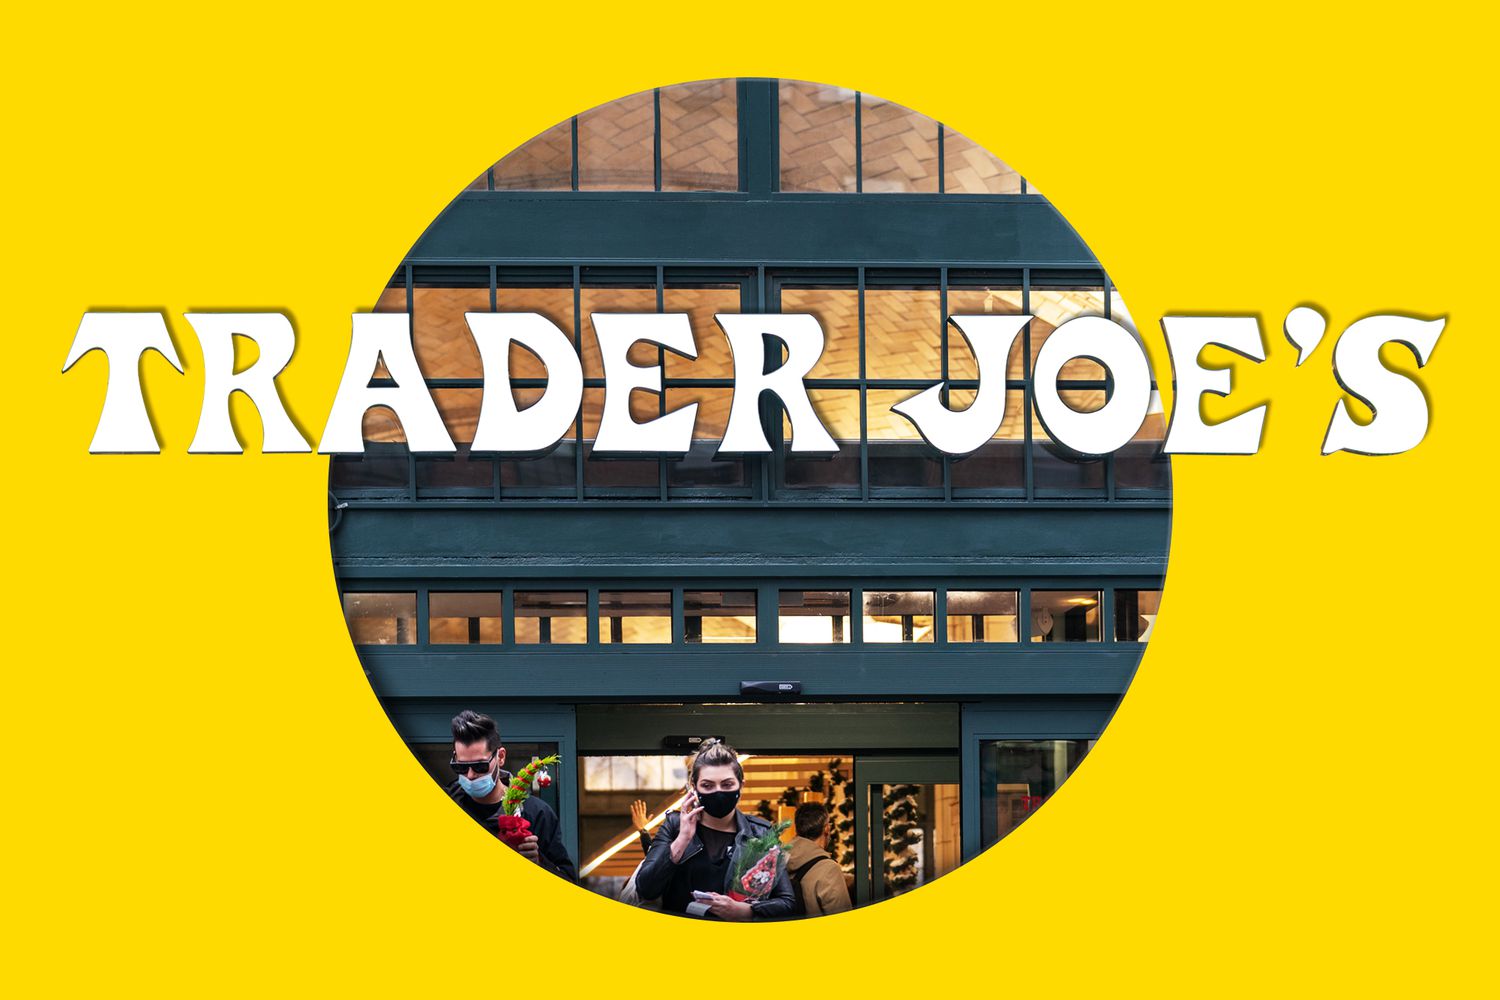 Trader Joe's storefront with a designed treatment